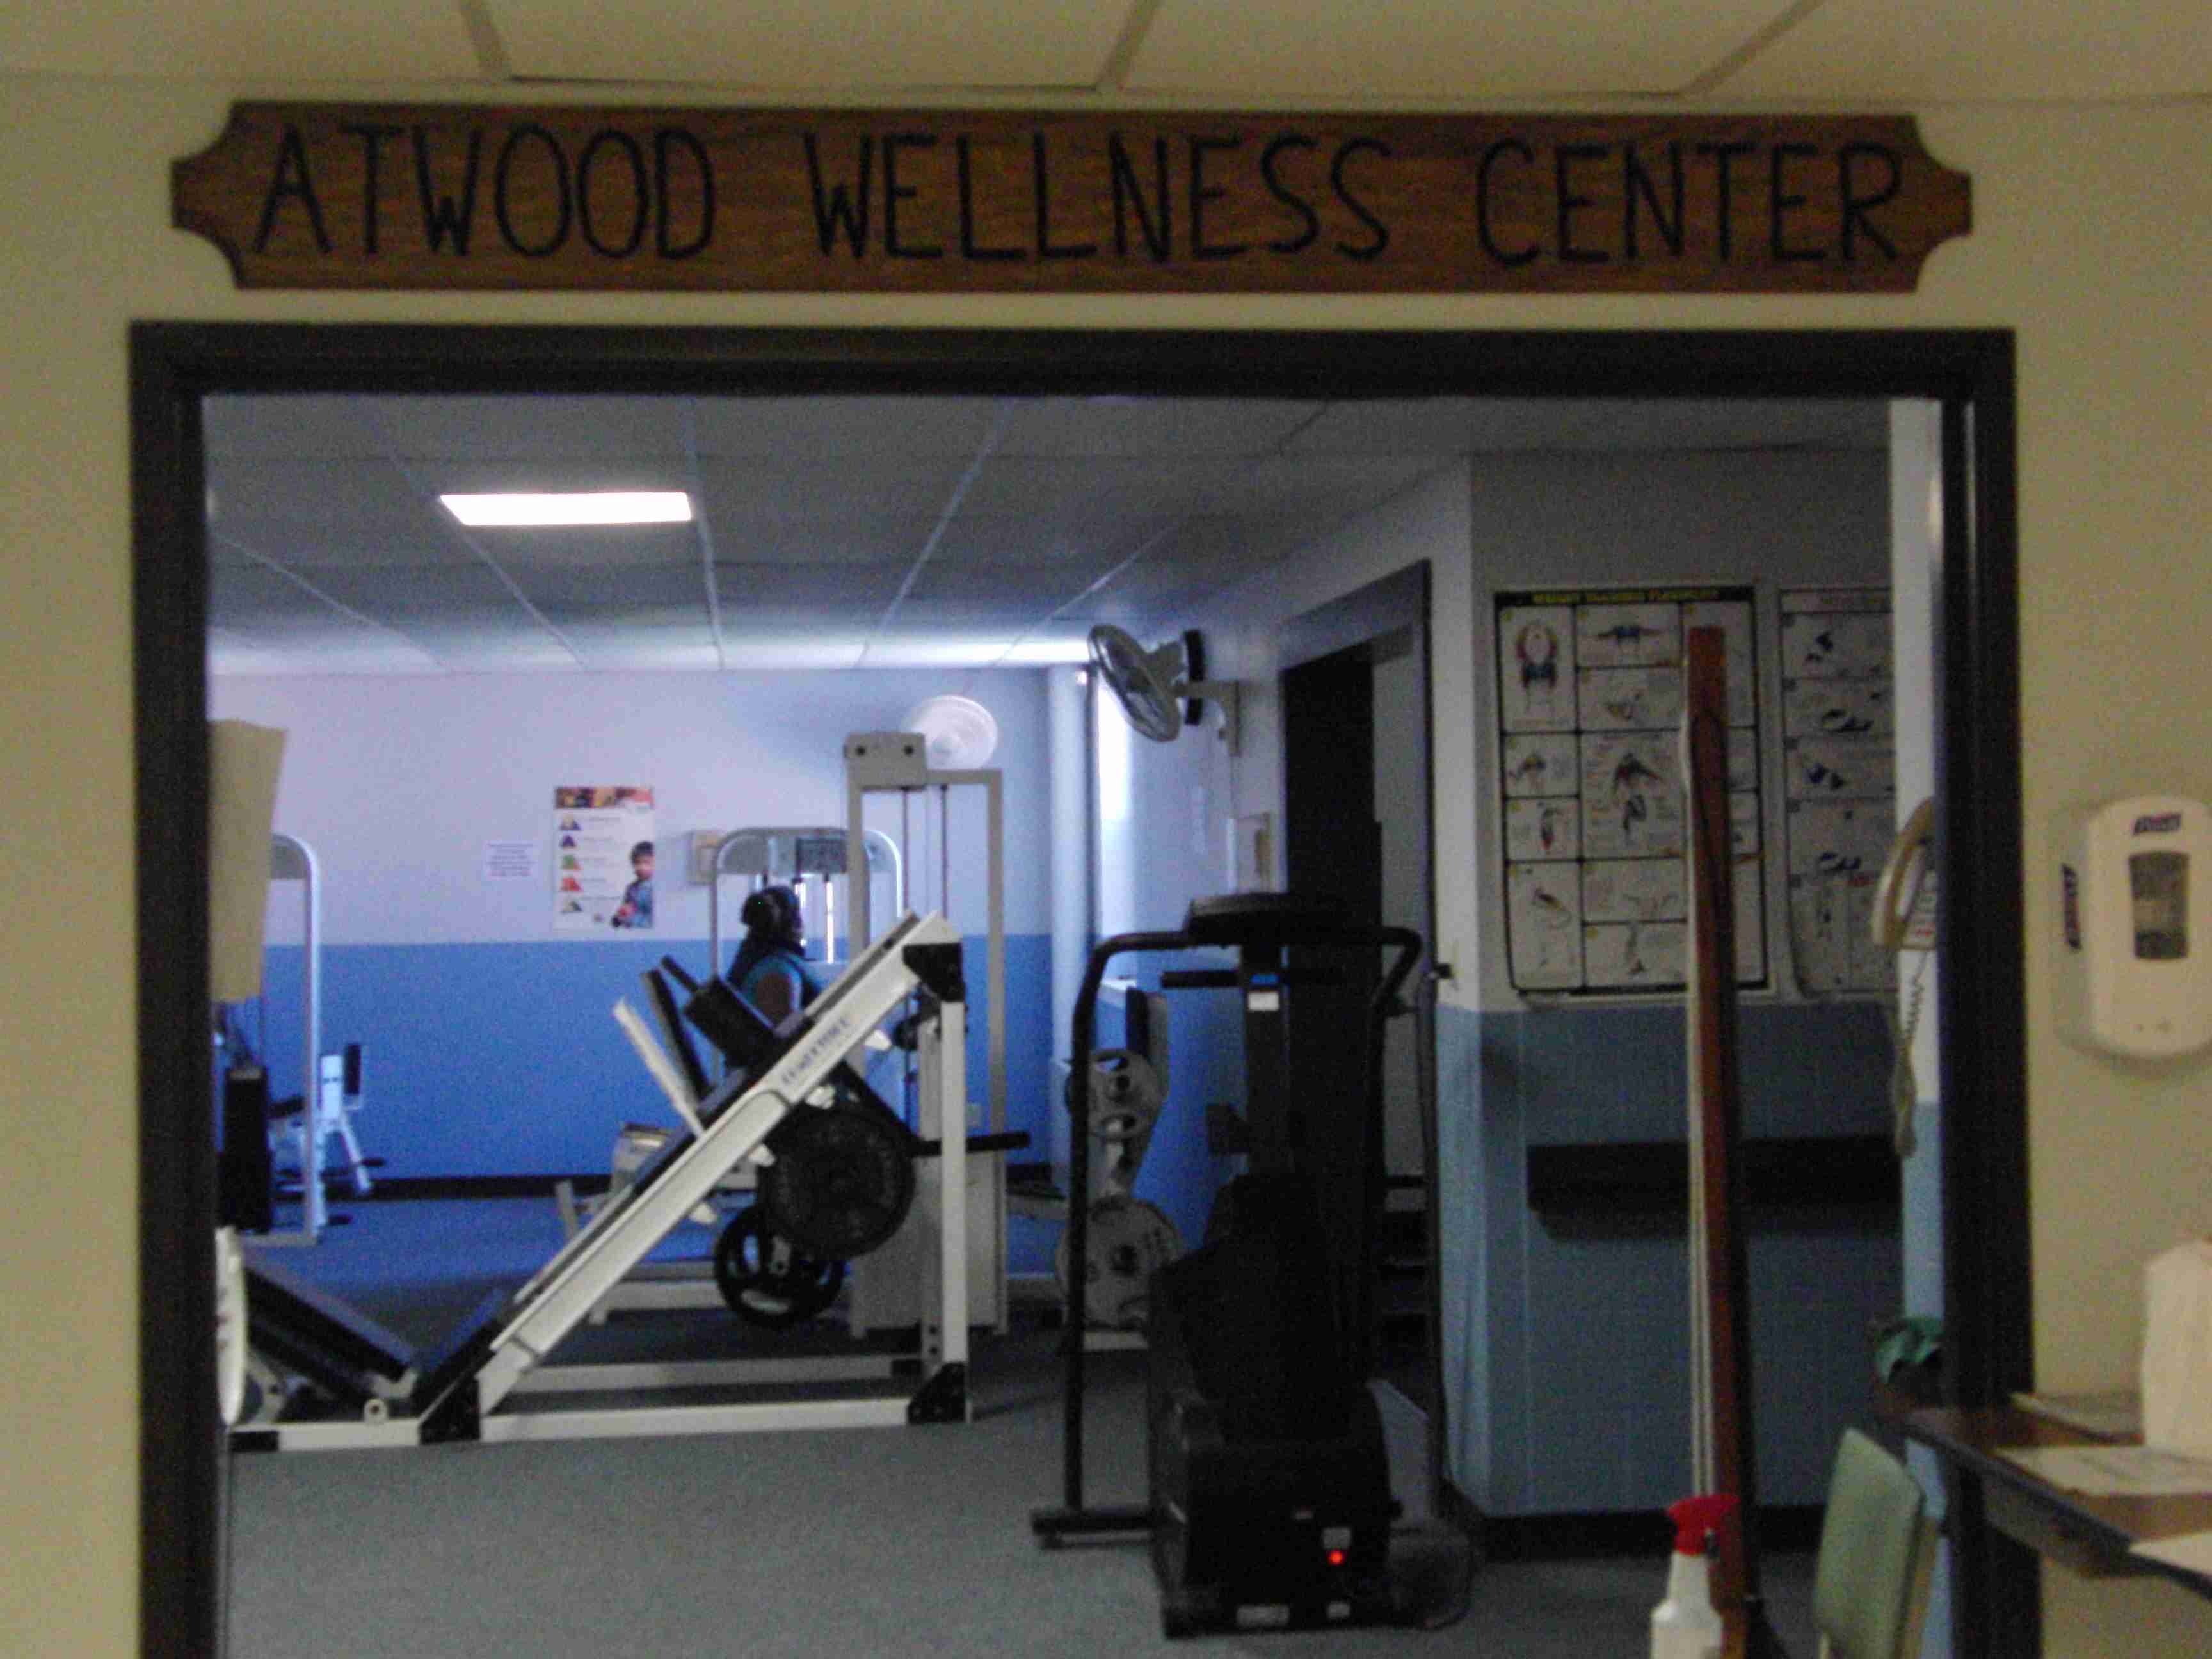 Edwards County Atwood Wellness Center